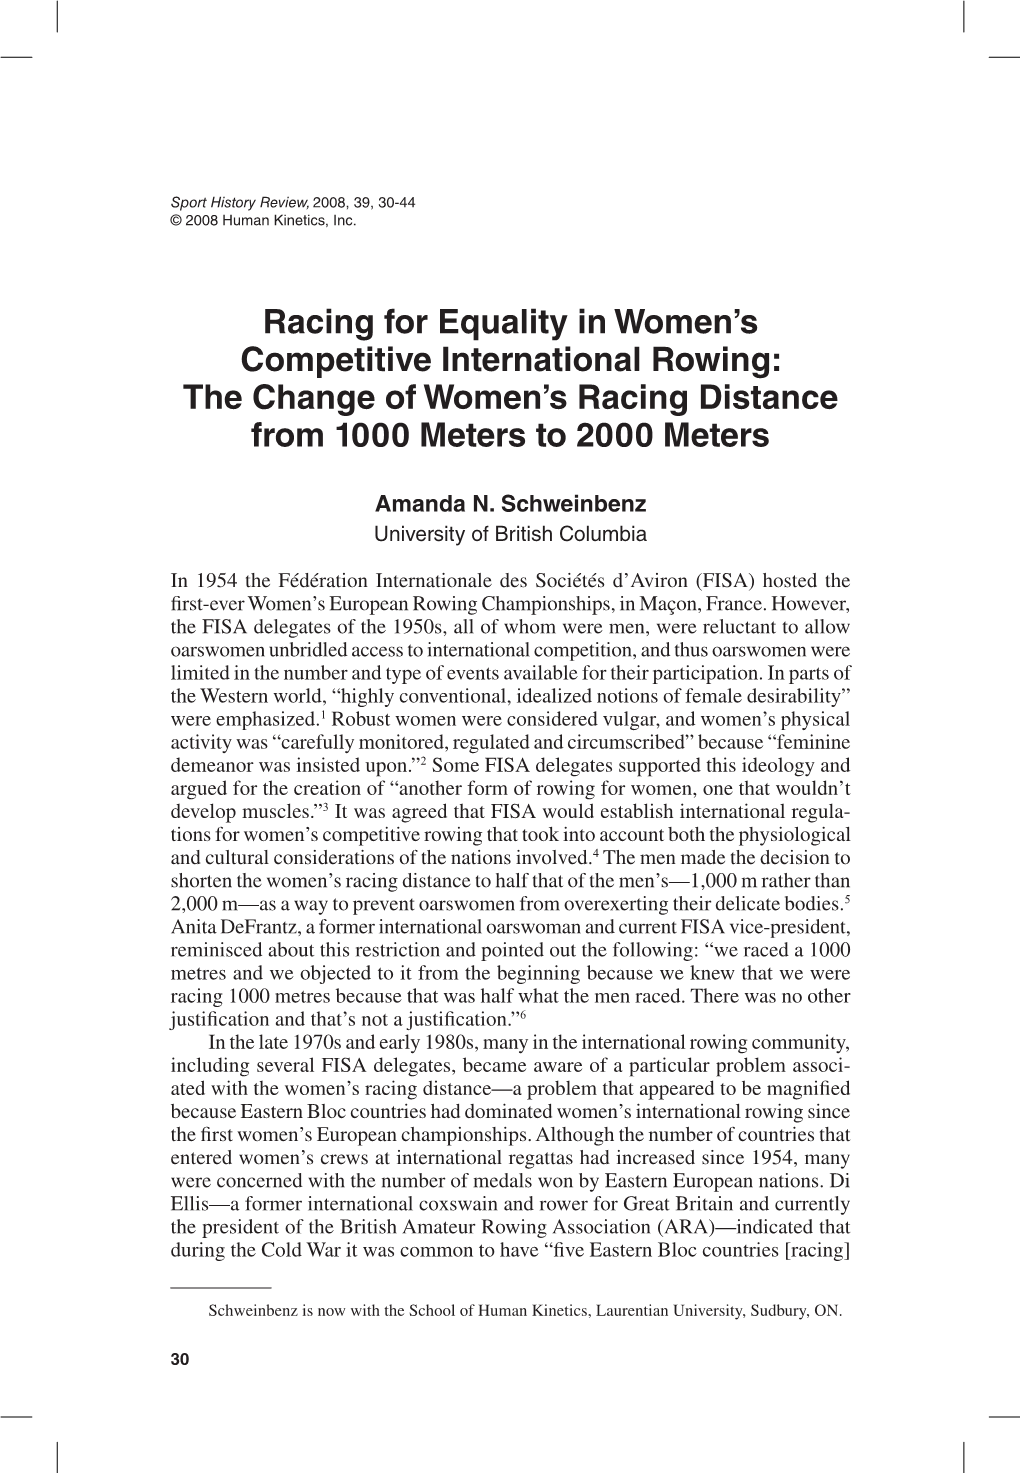 Racing for Equality in Women's Competitive International Rowing